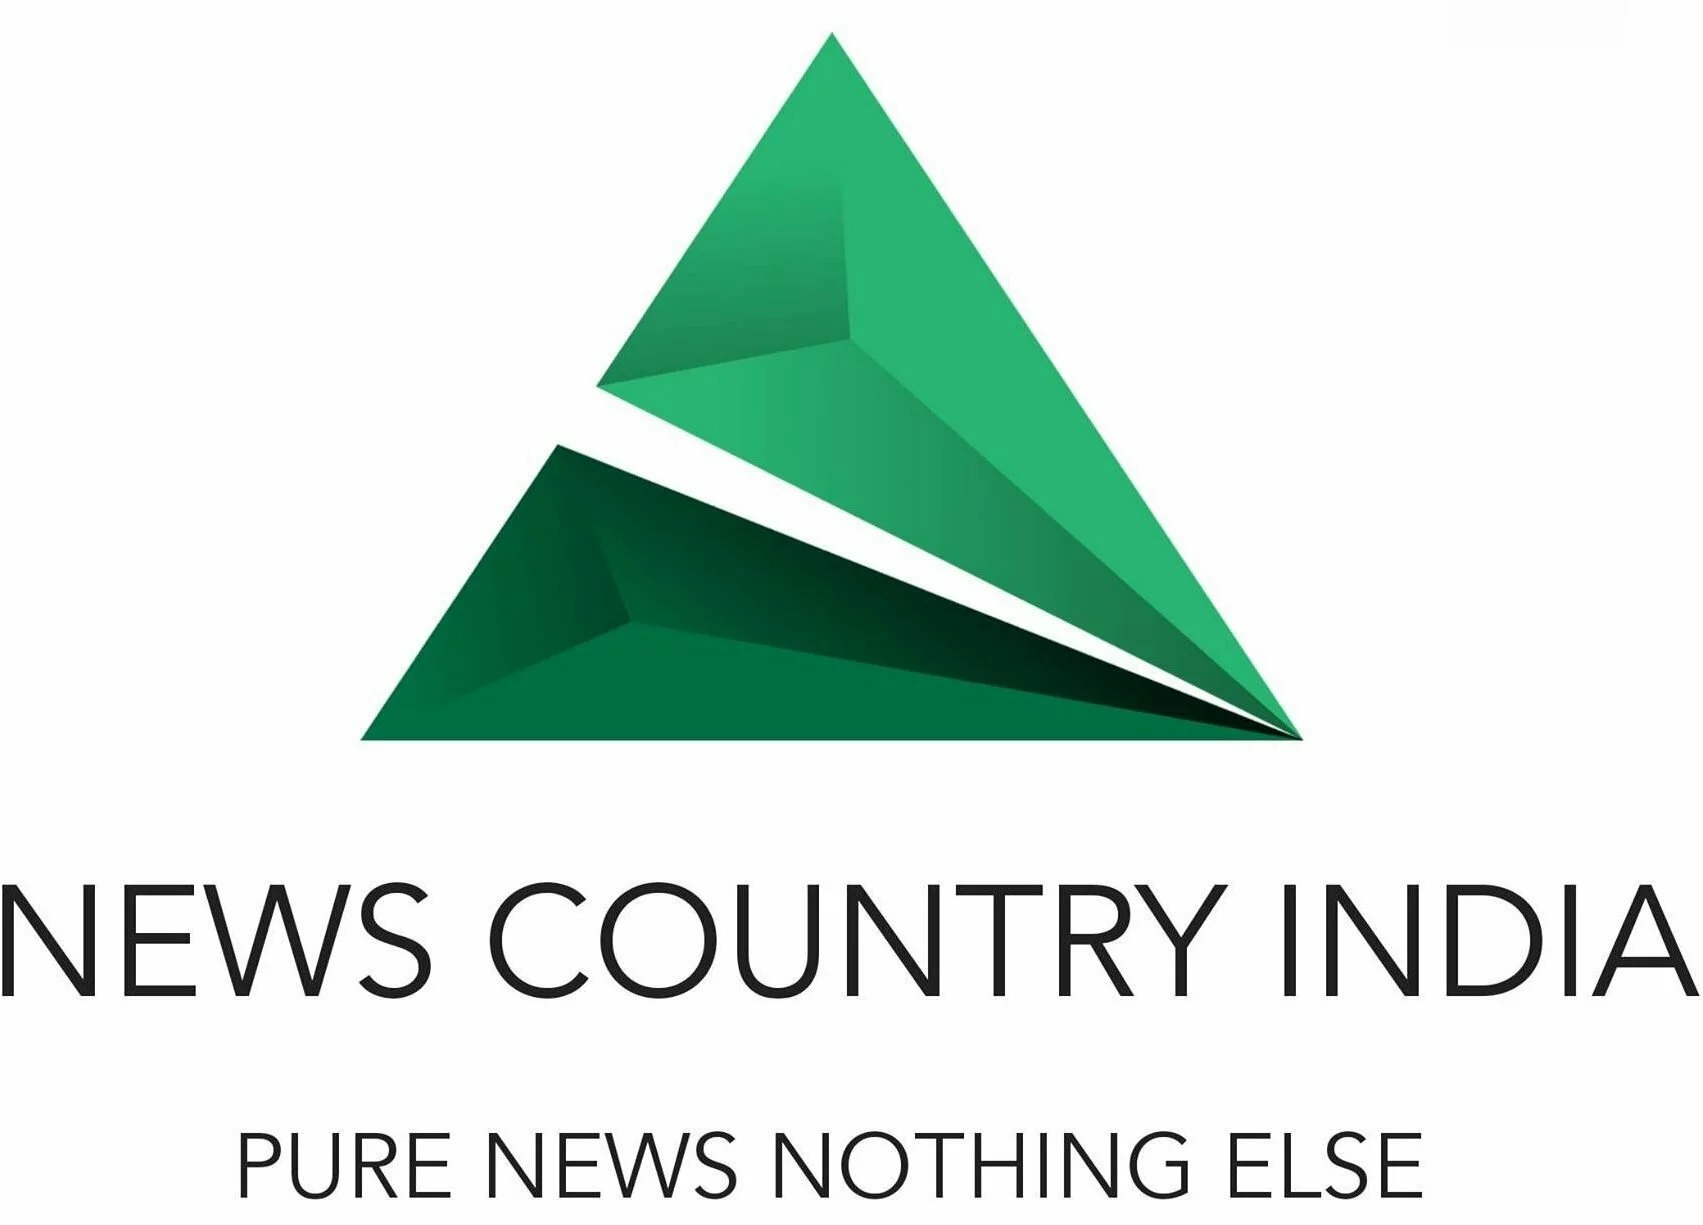 NEWS COUNTRY INDIA